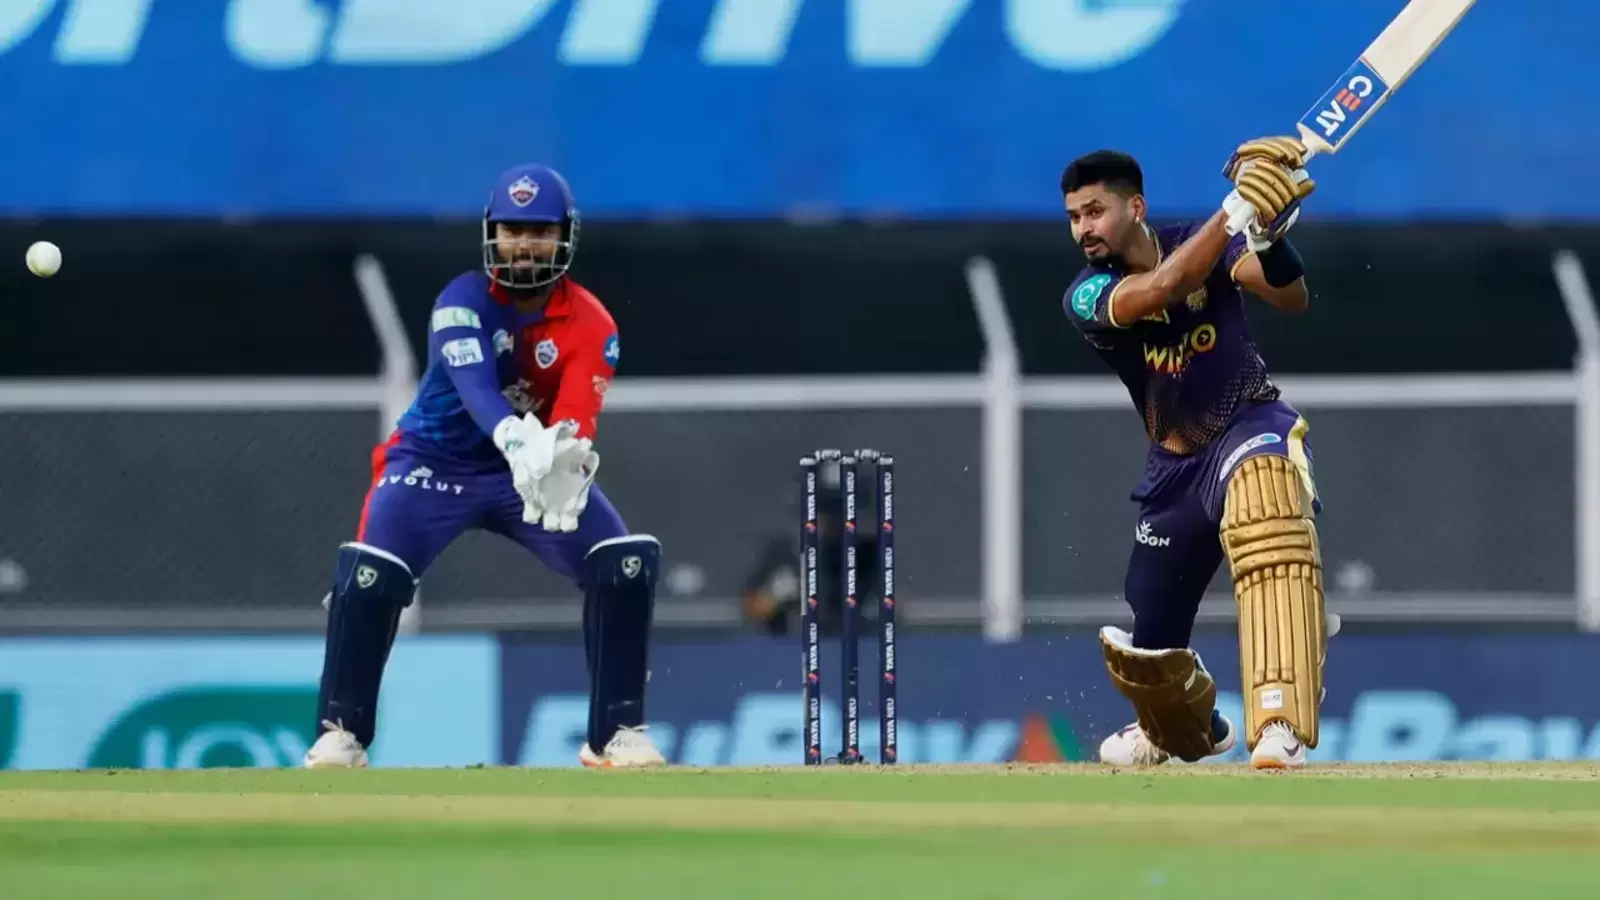 DC vs KKR, IPL 2022 Live Streaming When and where to watch on TV and Online Cricket